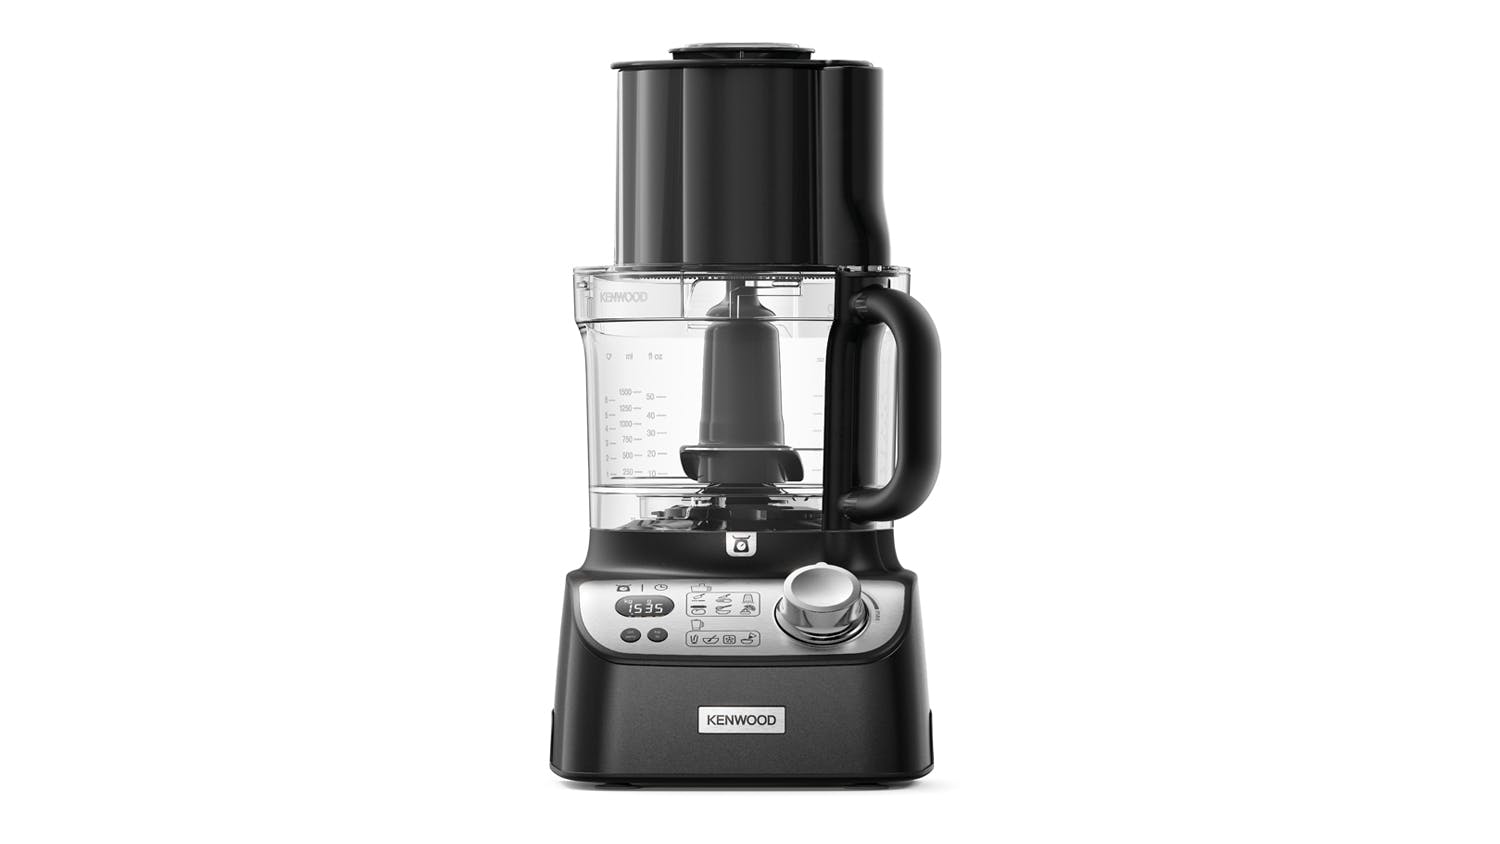 Kenwood MultiPro Express Weigh+ food processor review - Reviews